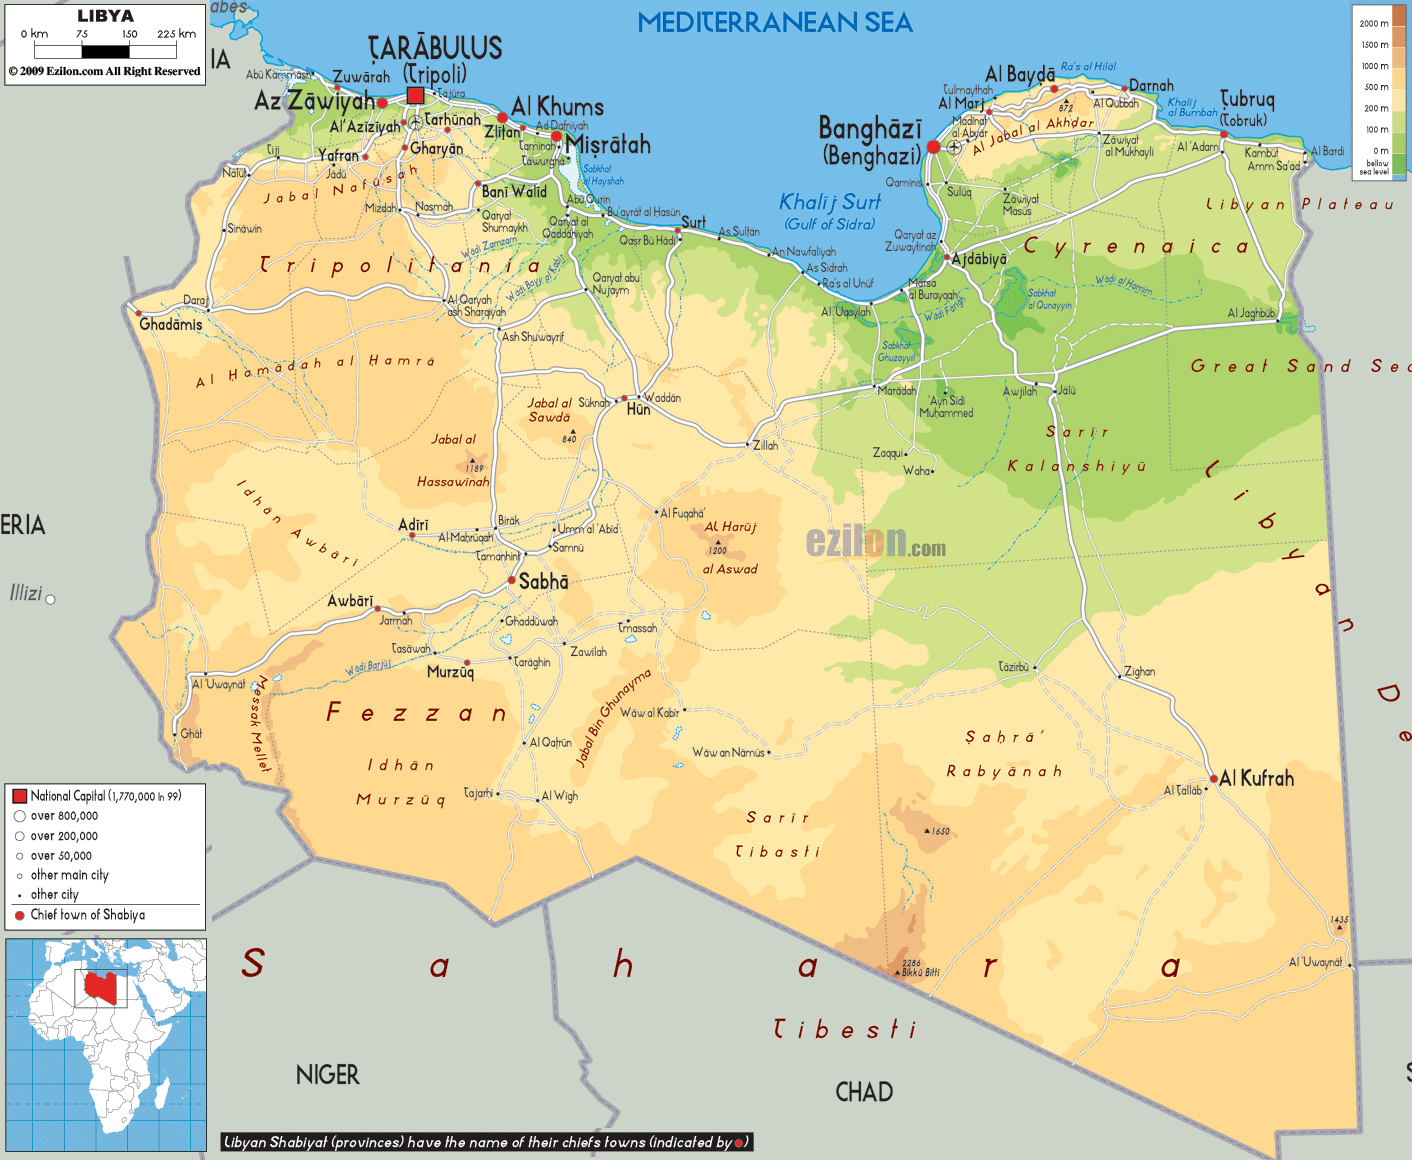 libya-s-past-and-future-war-in-context